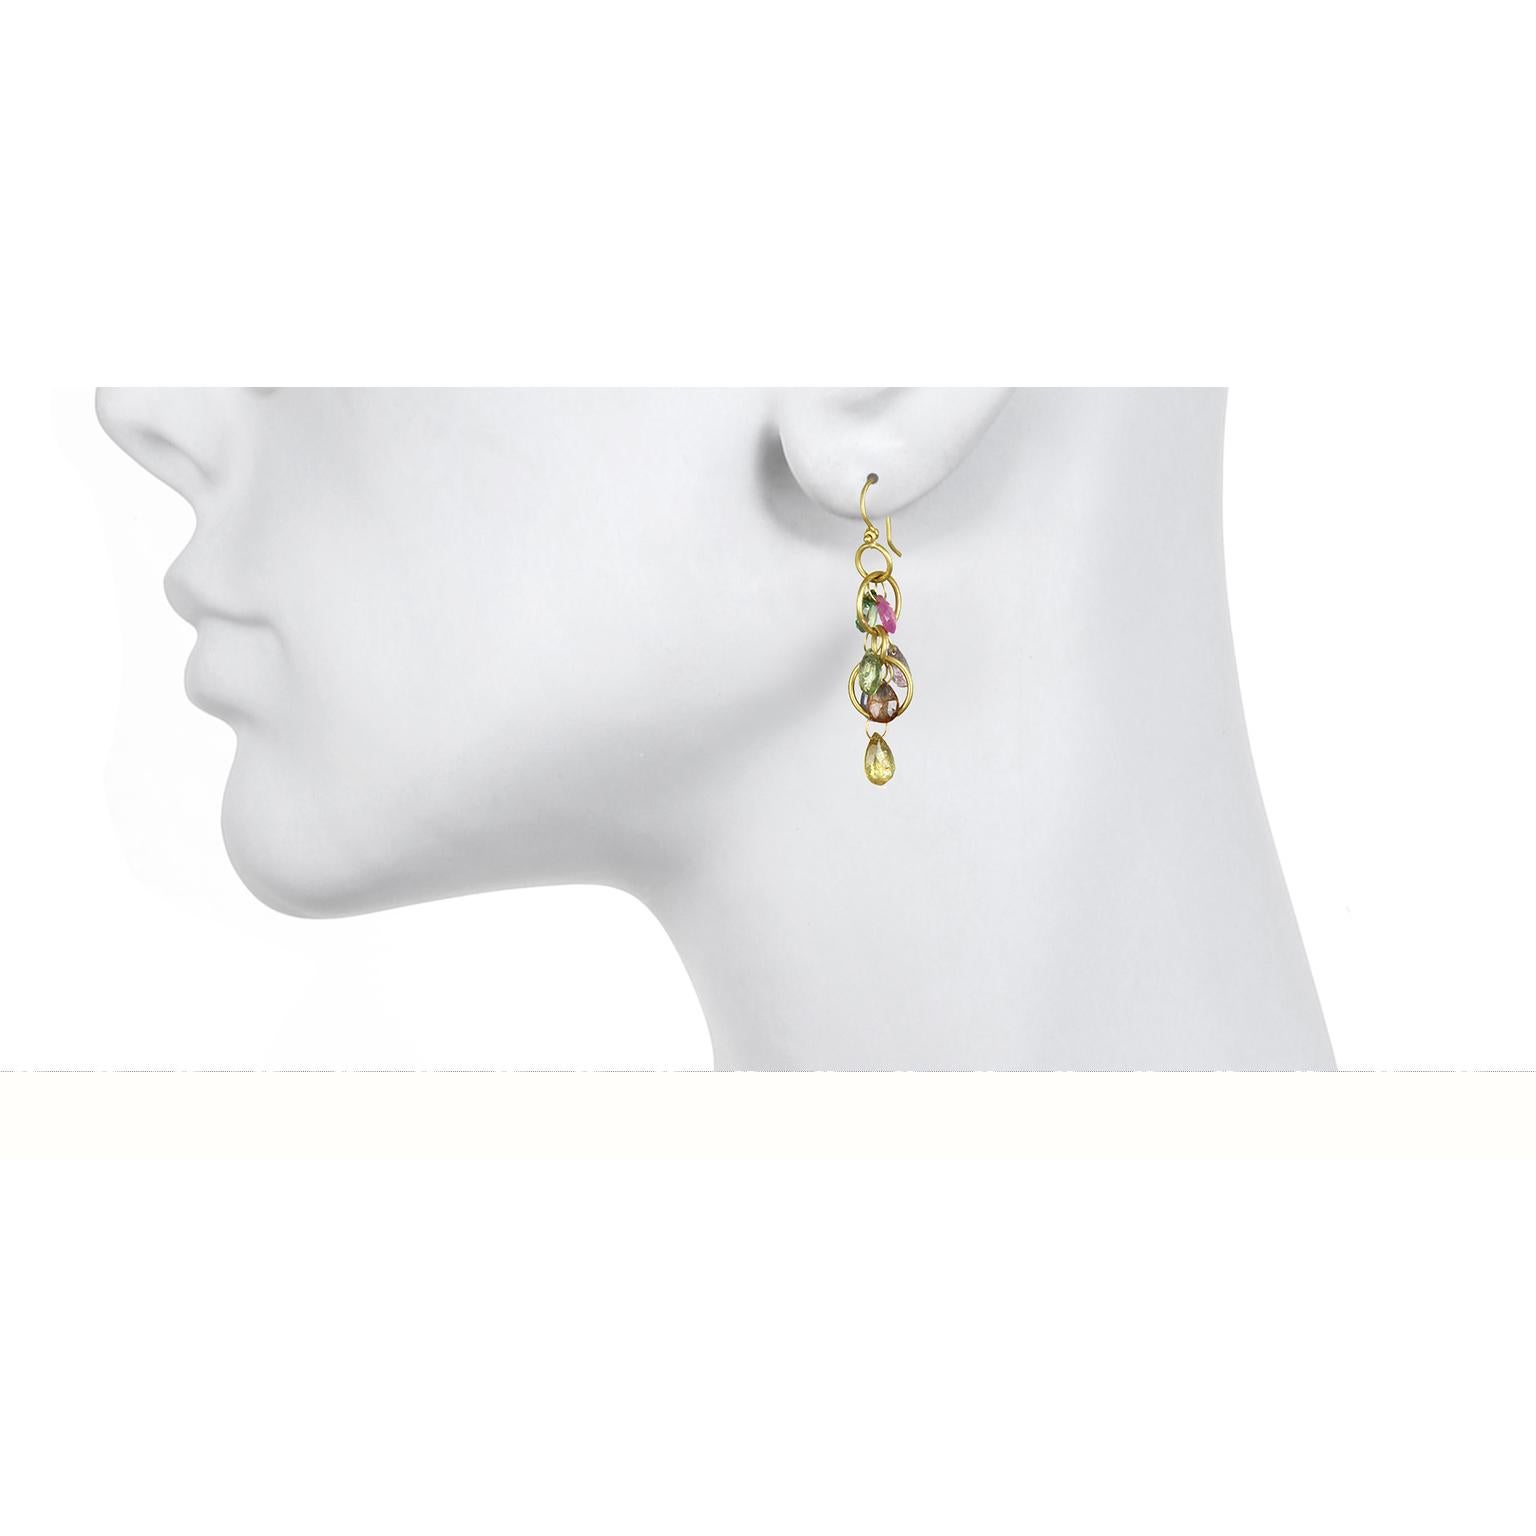 Faye Kim's signature briolette drop earrings in 18k gold. Handcrafted, colorful, lightweight and wearable.

Length:   1.5